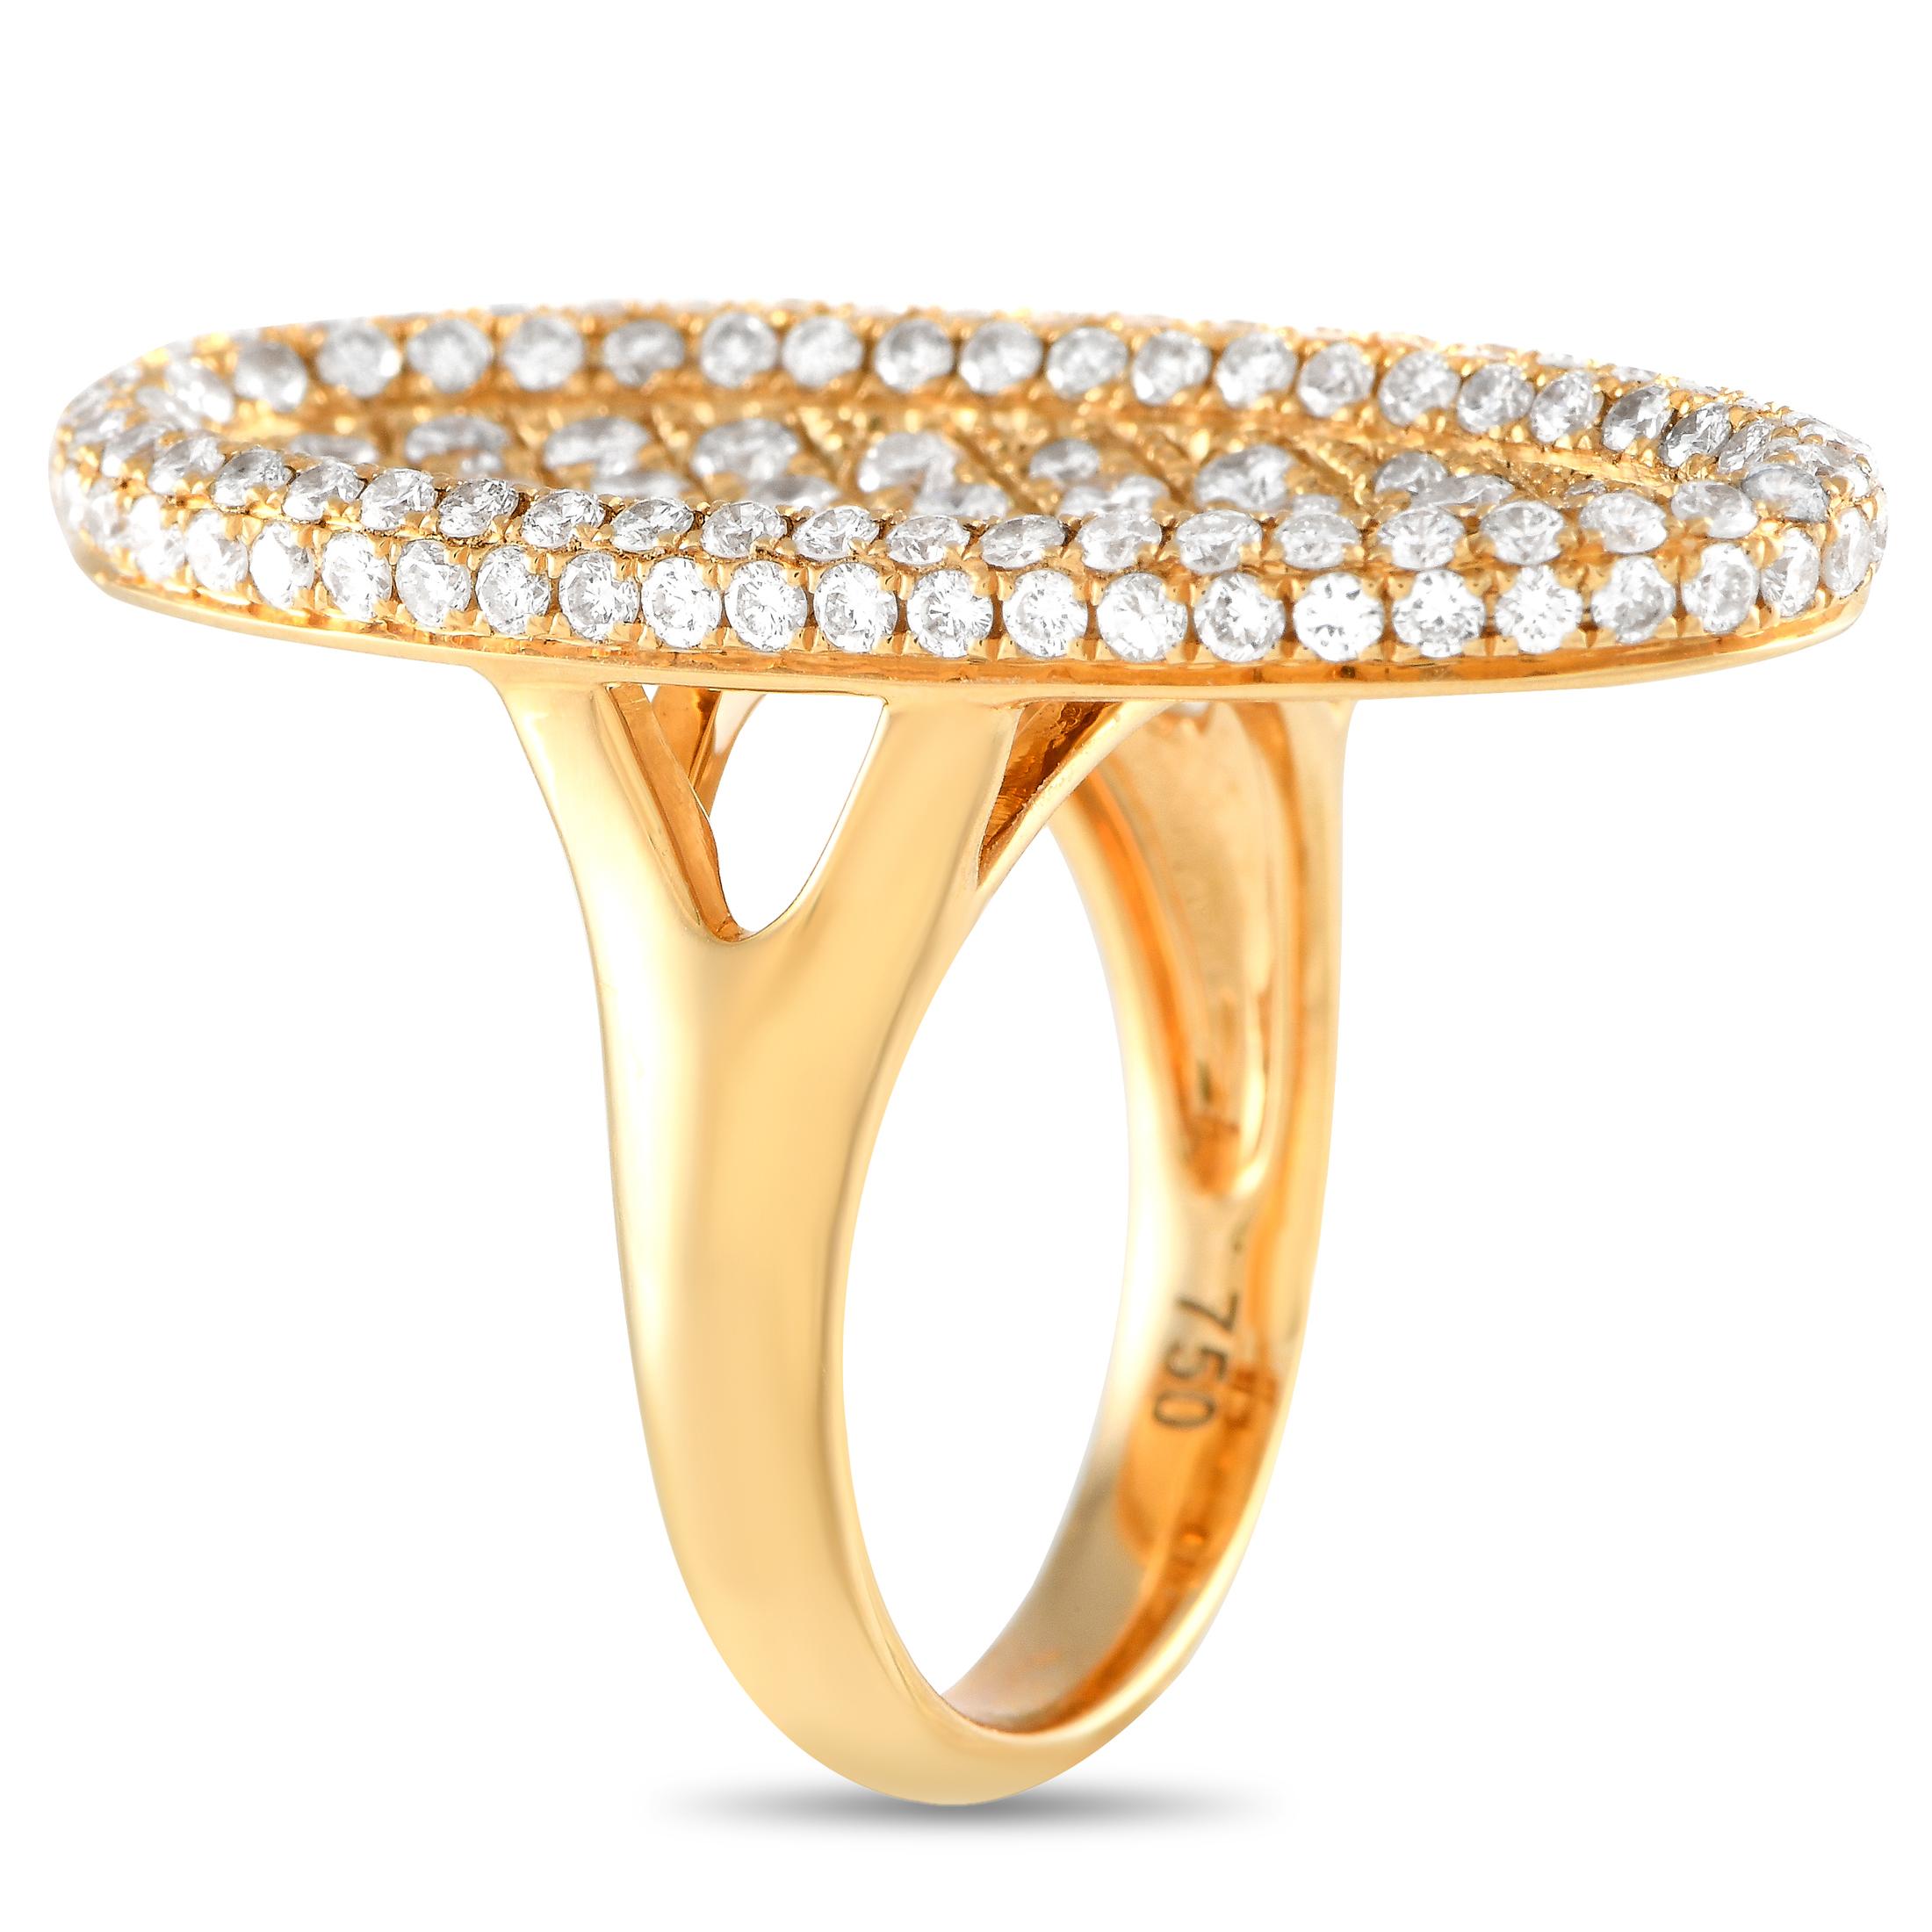 An LB Exclusive, this 18K yellow gold ring embraces the art of simplicity while assuring a maximal style impact. It features a split shank that securely holds an oversized oval plate in solid 18K yellow gold. The attention-grabbing centerpiece is